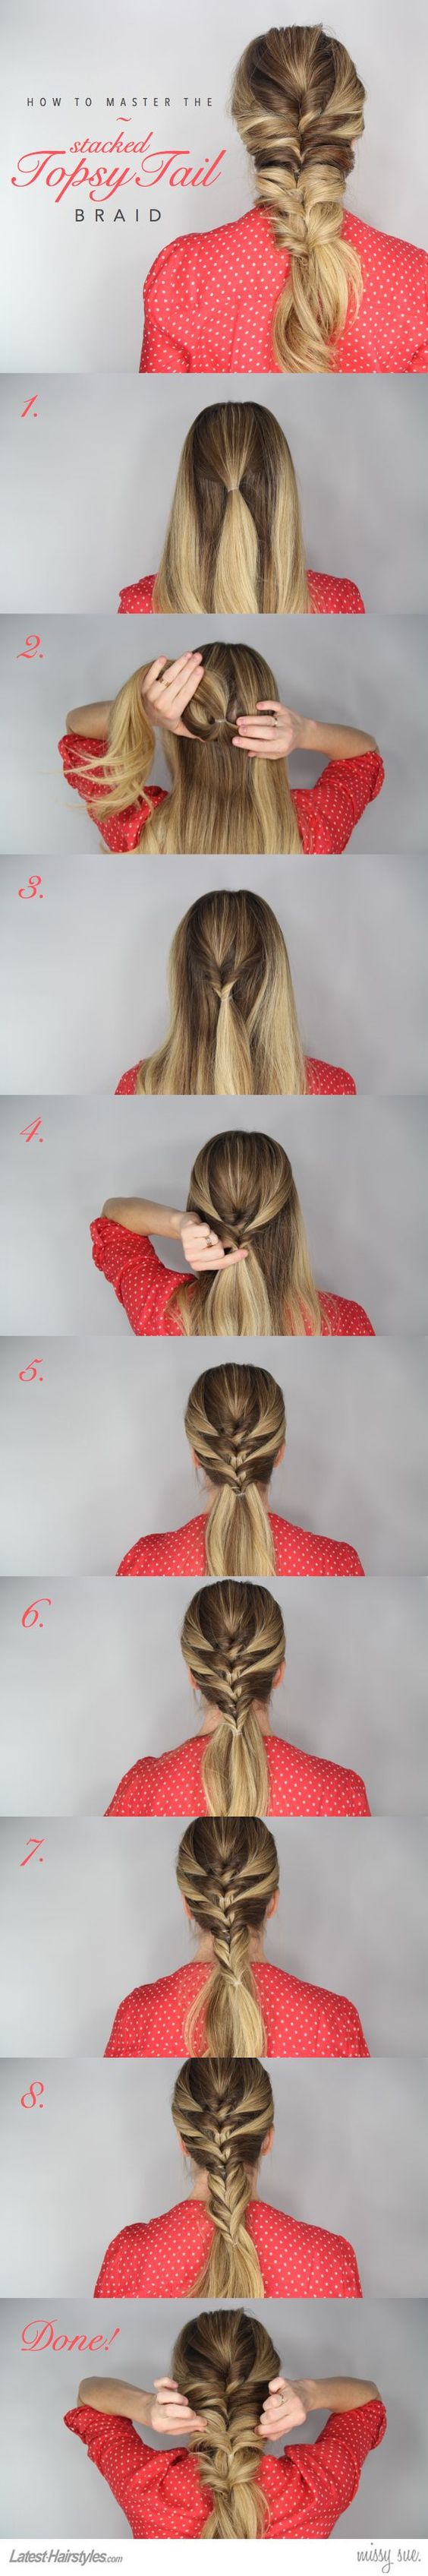 Stacked-Topsy-Tail-Braid over